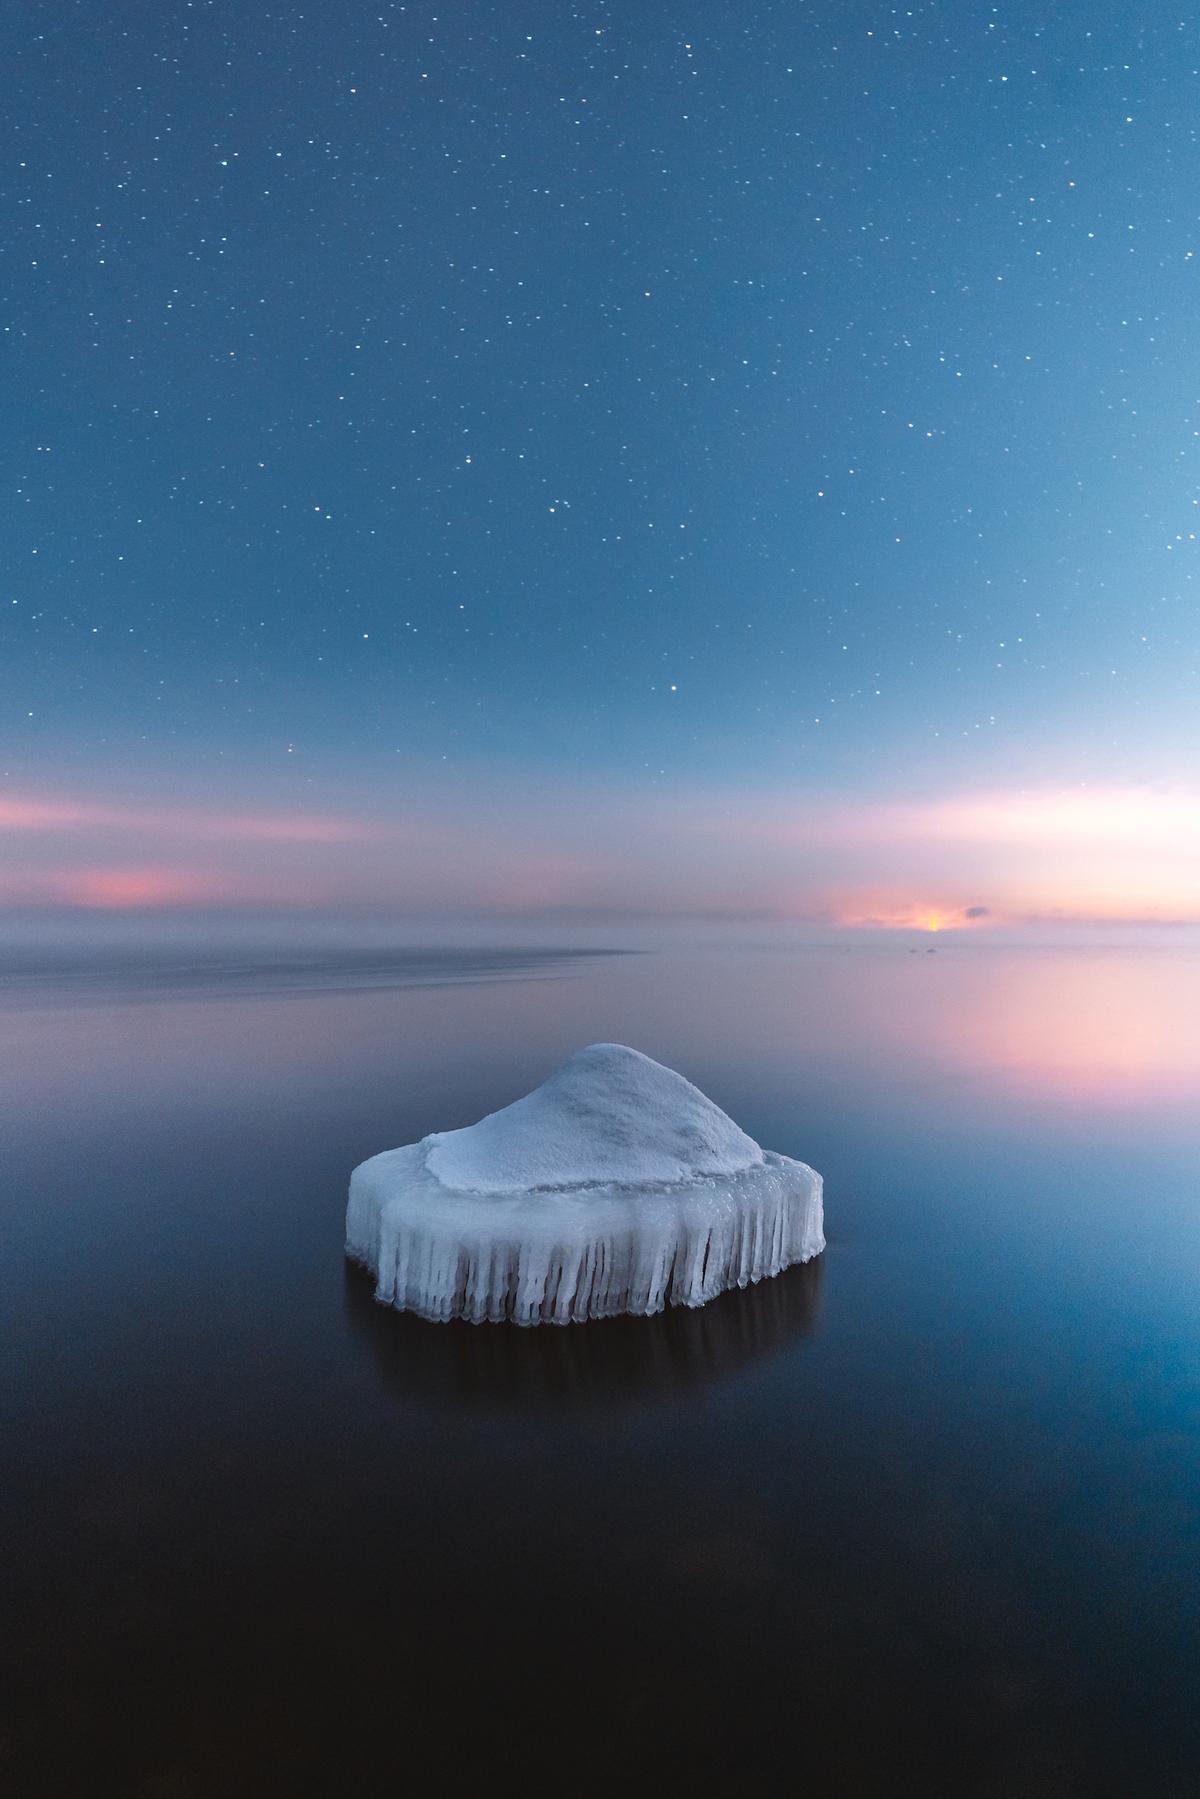 "Frozen Rock" by Damon Beckford, Finland; "In January 2021 the temperature went down to -25°C on the south coast of Finland. I went to Emäsalo in the city of Porvoo to capture the freezing of the Baltic Sea. As the sea starts to freeze, it creates beautiful ice sculptures on the rocks, and a few days later the sea is frozen. The picture was shot at night with a slow shutter speed on extremely slippery ice." (© Damon Beckford, Finland, Winner, National Awards, Landscape, 2022 Sony World Photography Awards)